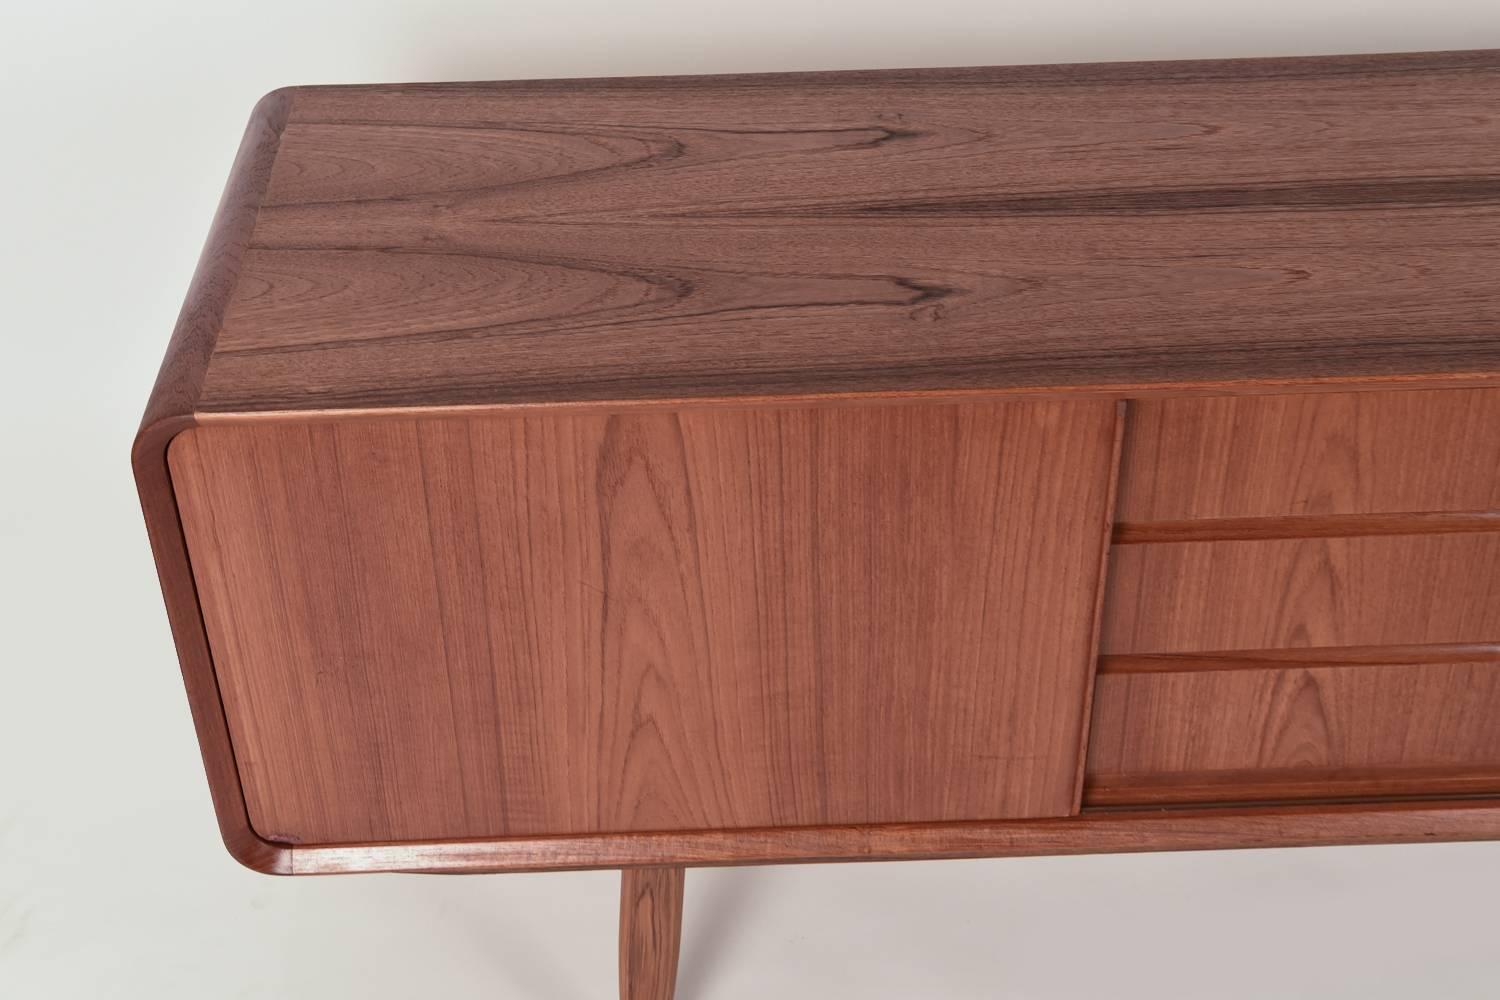 This Danish Mid-Century sideboard by Nexo is made of handsome teak wood. Wonderful modern design with a Classic look.